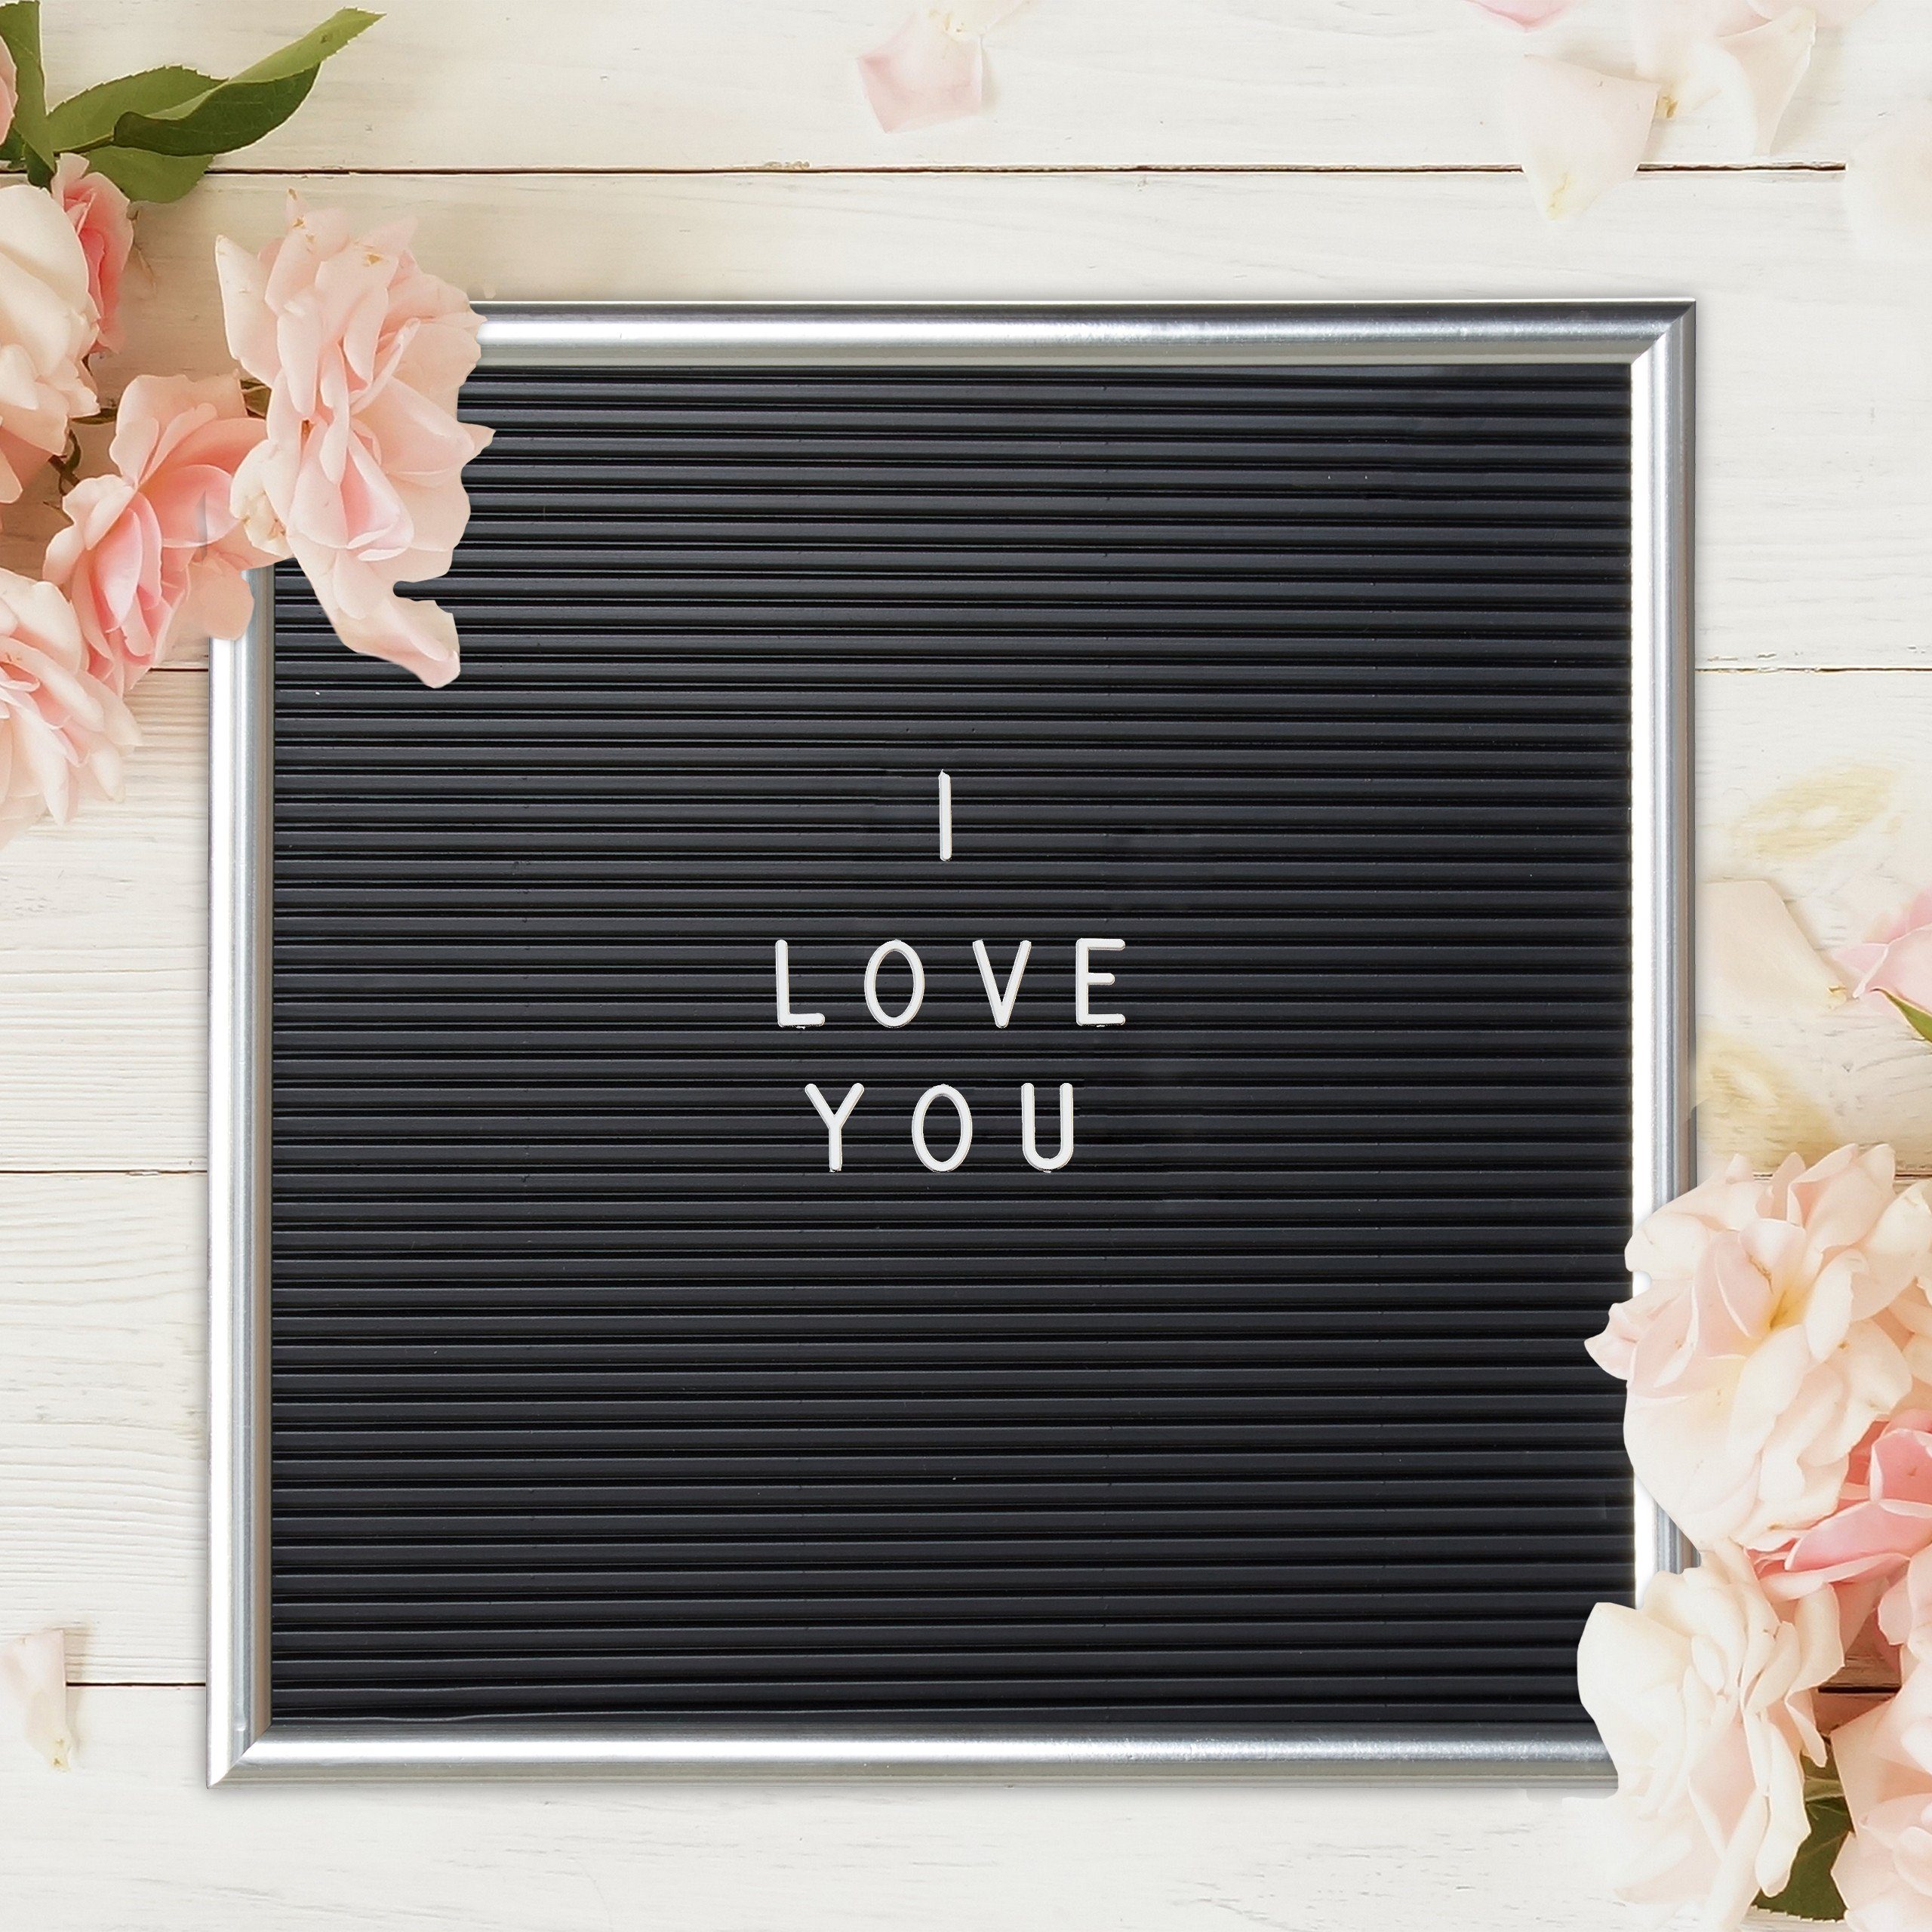 relaxdays Memoboard 4 Letterboard 30 30 x silber x cm